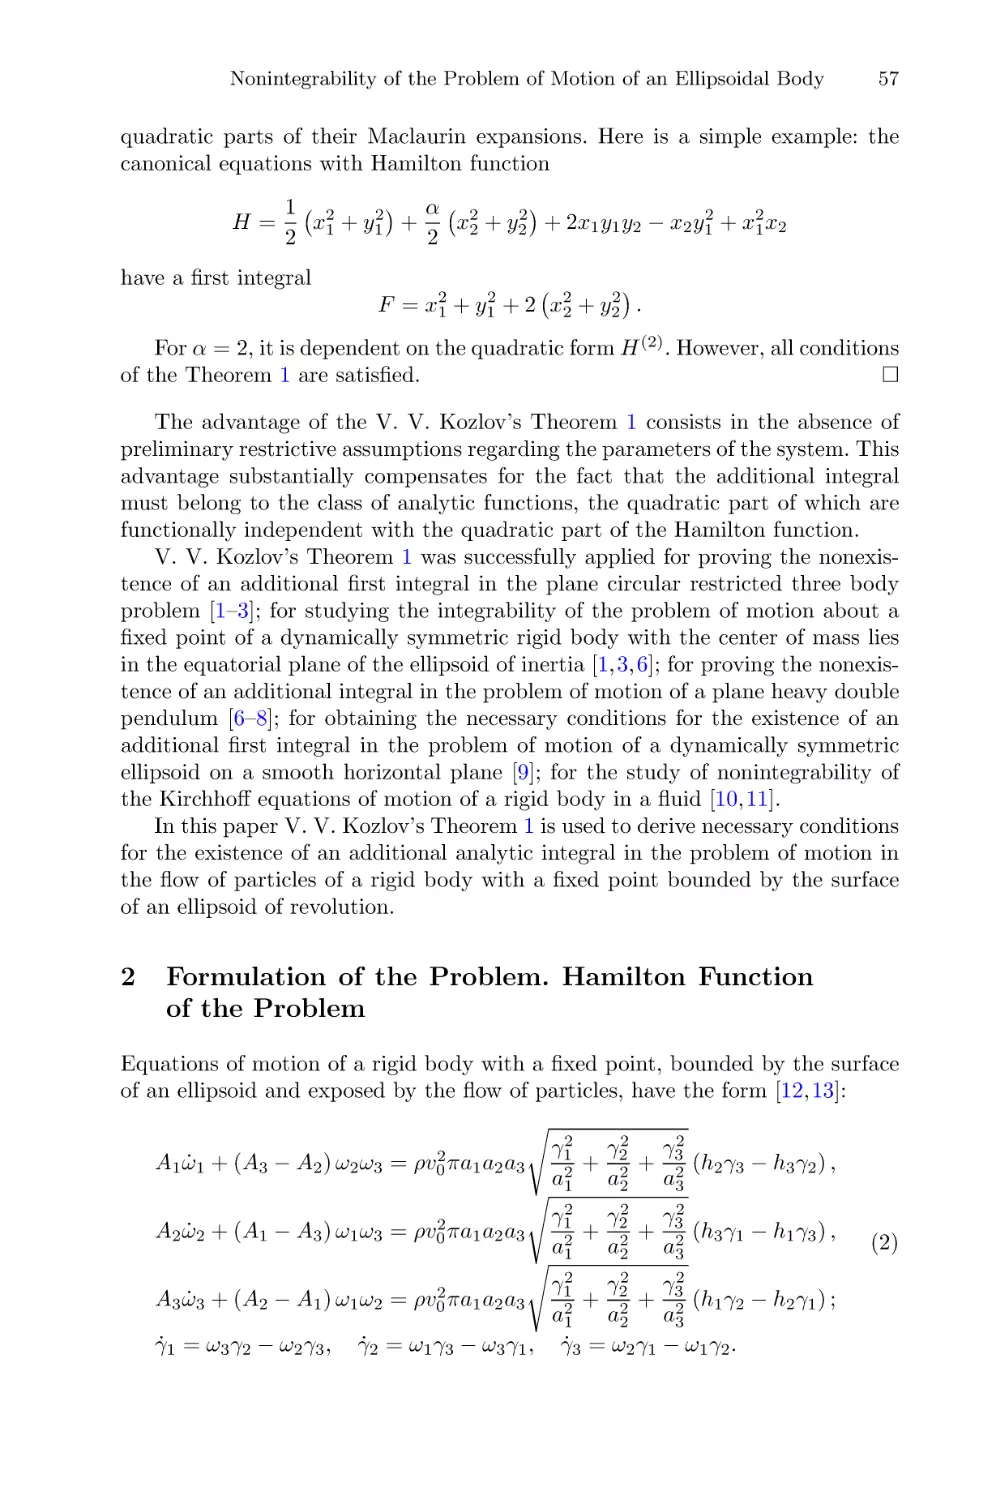 2 Formulation of the Problem. Hamilton Function of the Problem